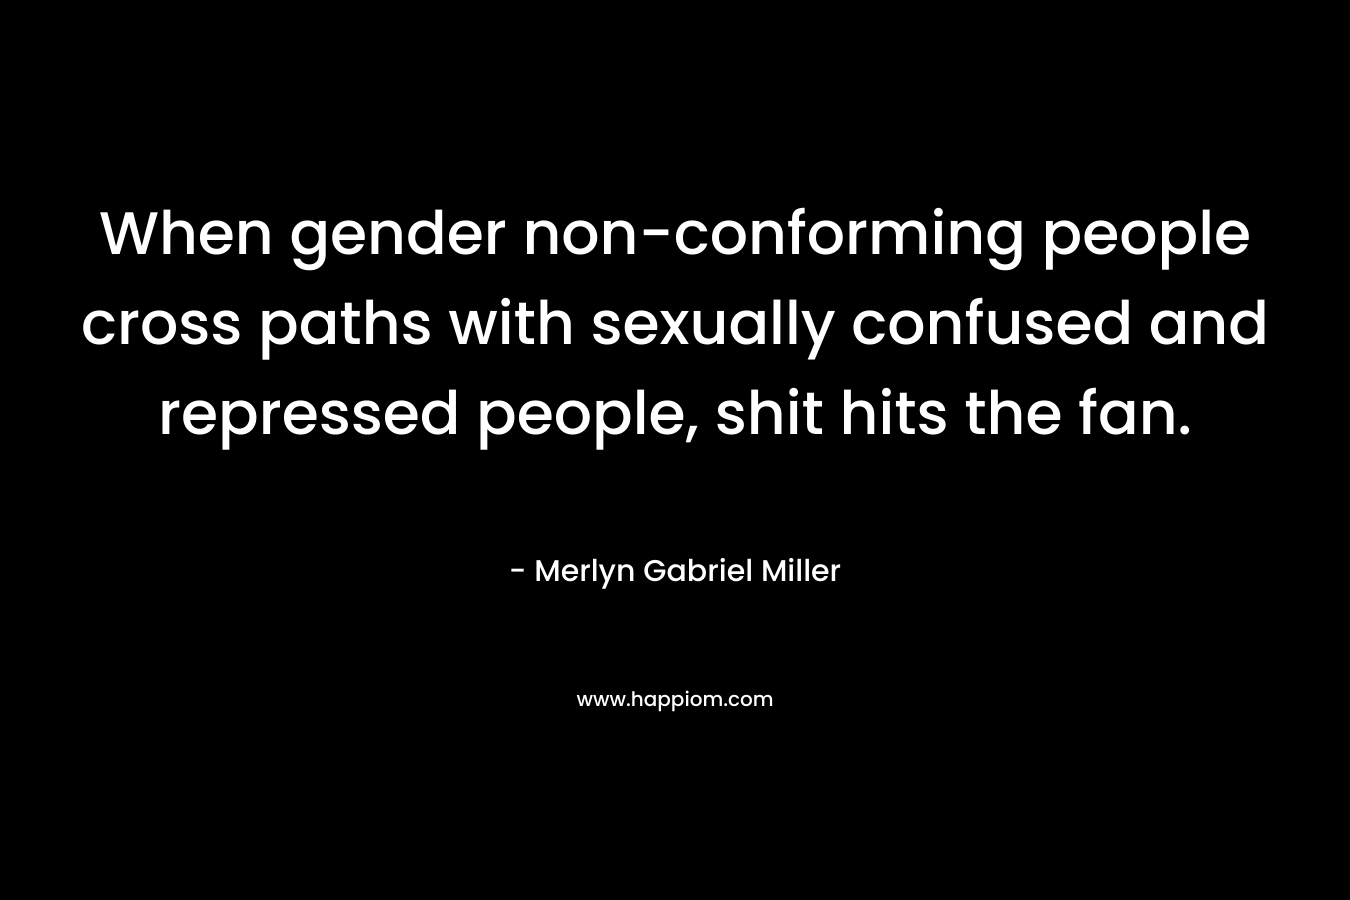 When gender non-conforming people cross paths with sexually confused and repressed people, shit hits the fan.